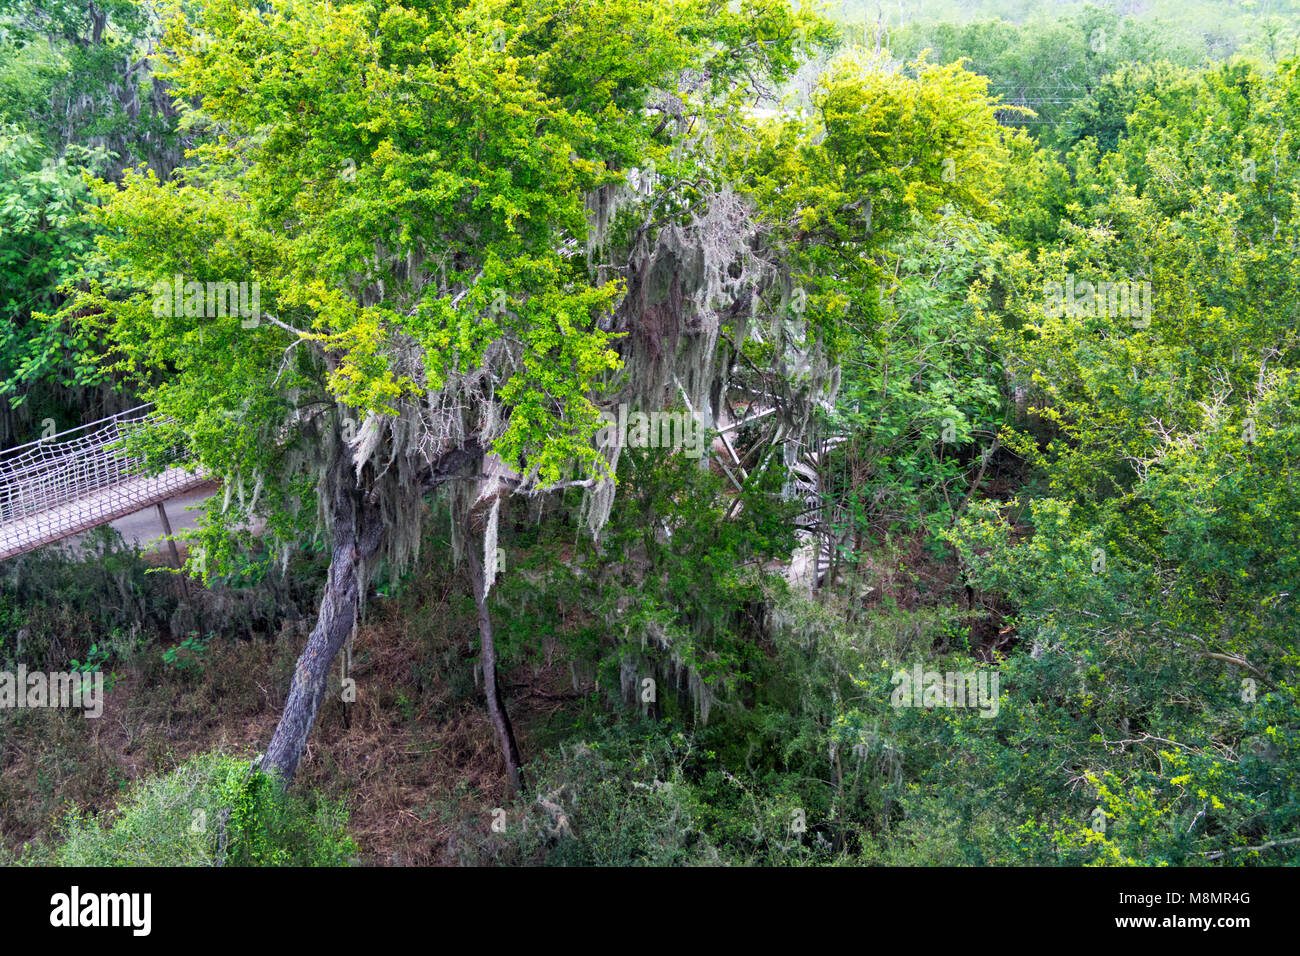 Spanish Moss hangs from a Texas Ebony tree in the riparian forest at the Sanat Ana National Wildlife Refuge near Alamo, Texas in the Rio Grande Valley Stock Photo